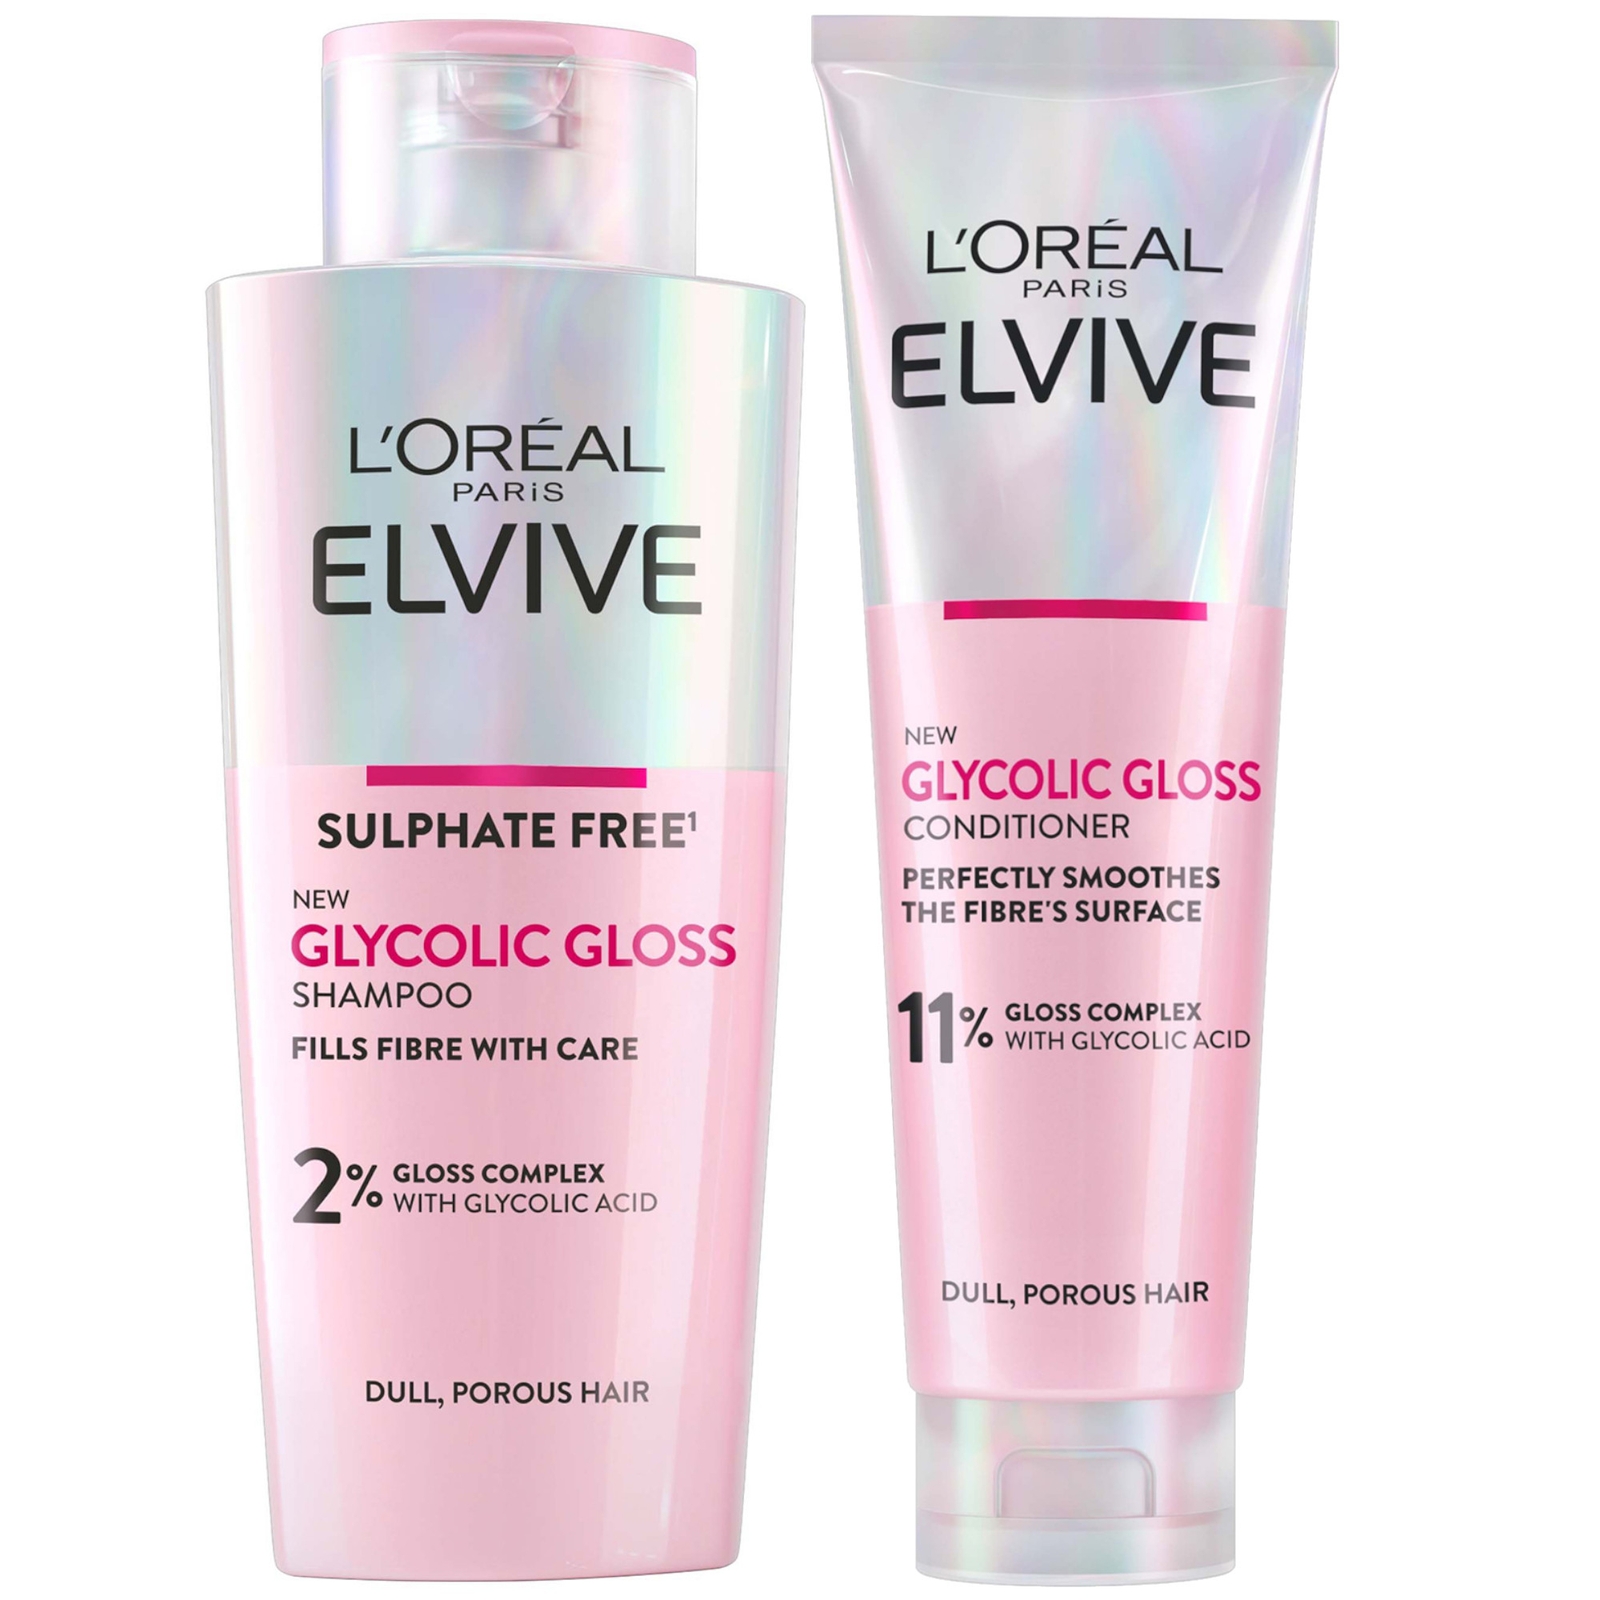 L'Oreal Paris Elvive Glycolic Gloss Shampoo and Conditioner Set for Dull Hair